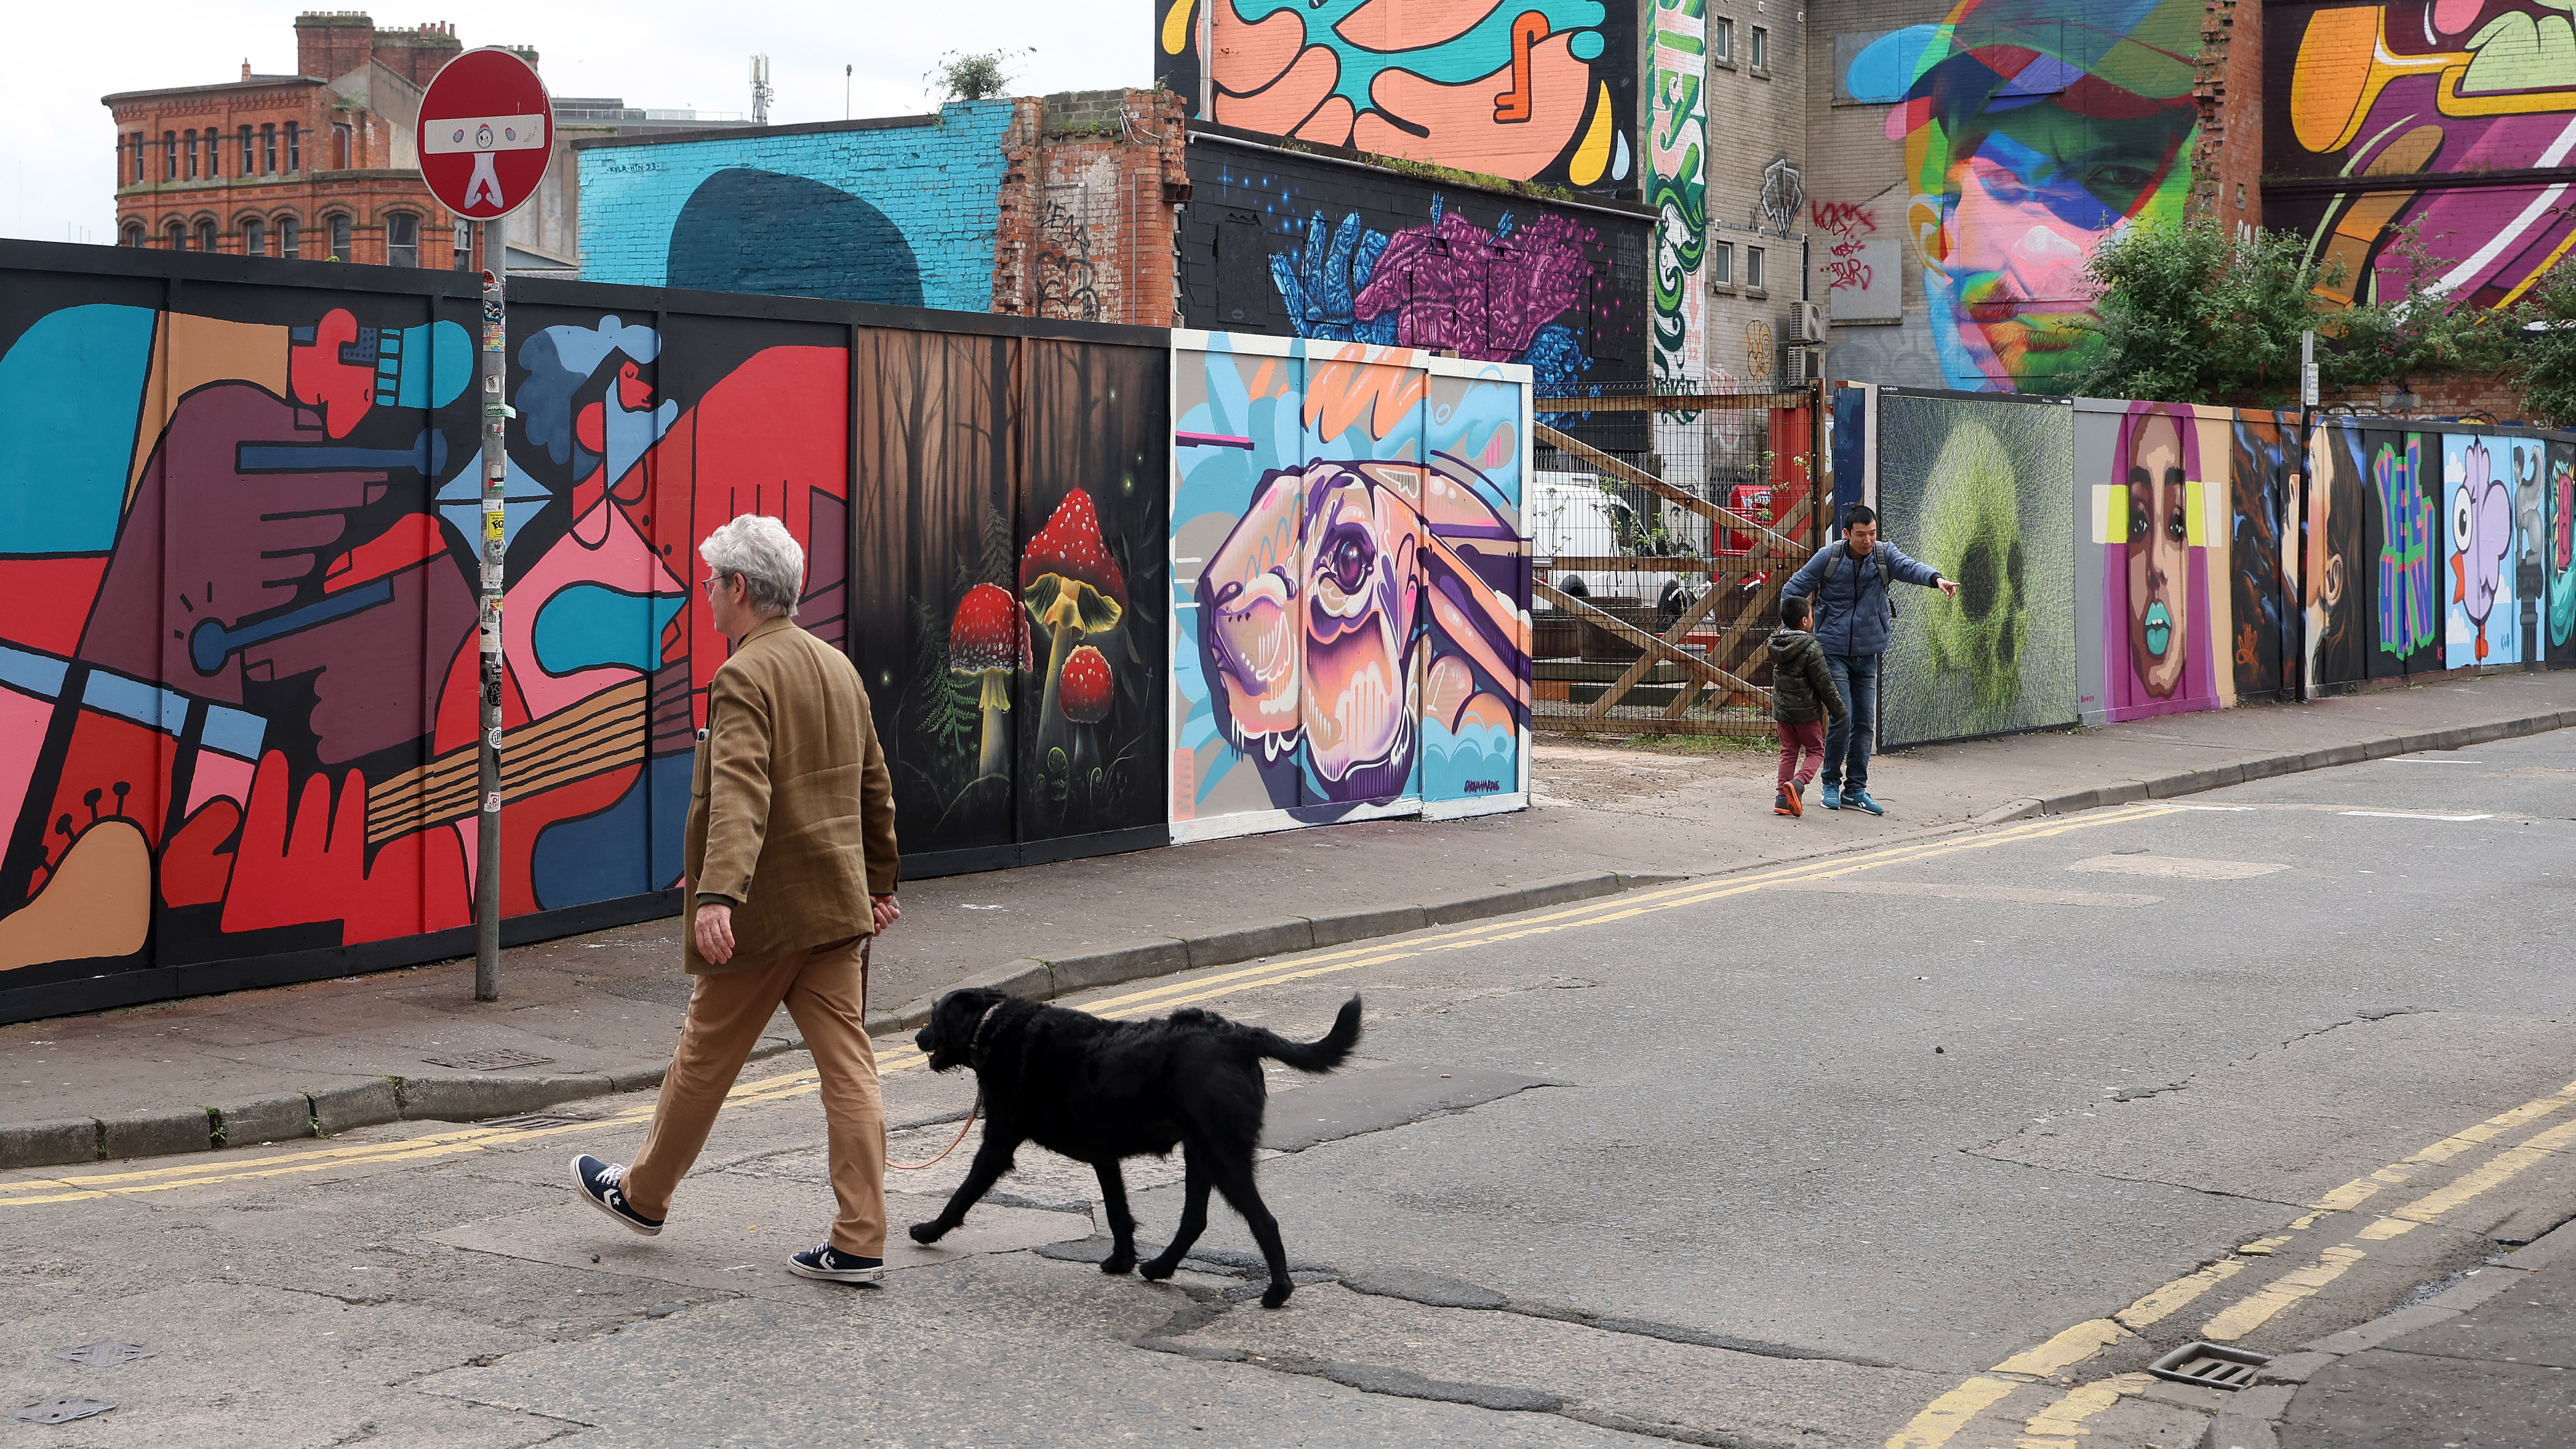 The Hit the North murals in Belfast as the city was named 19thin the world’s street art hotspots. PICTURE: MAL MCCANN